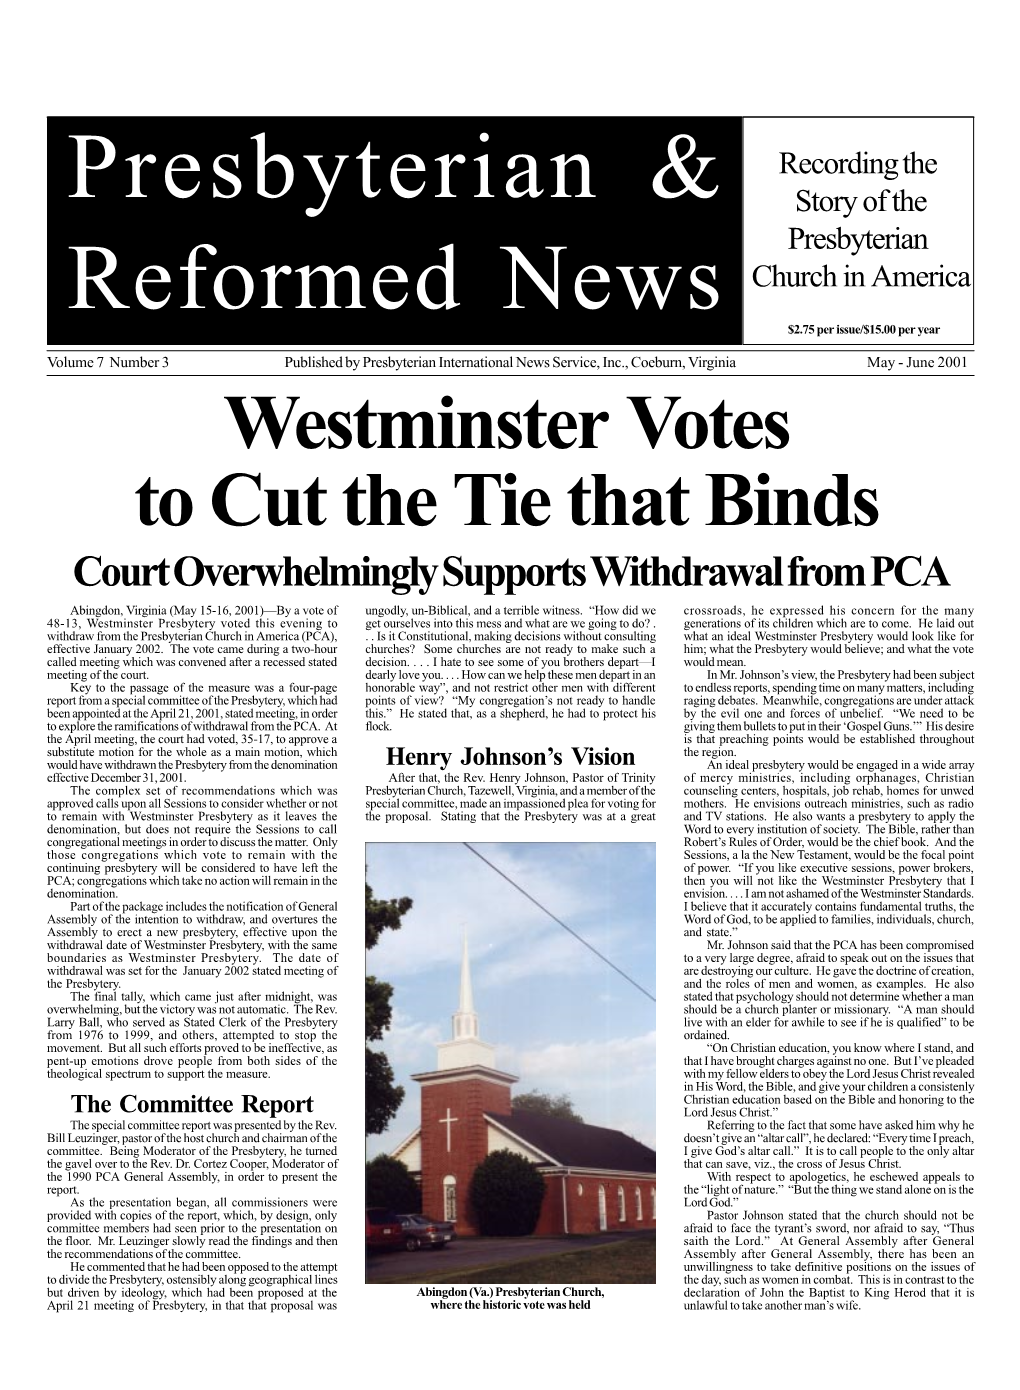 Westminster Votes to Cut the Tie That Binds